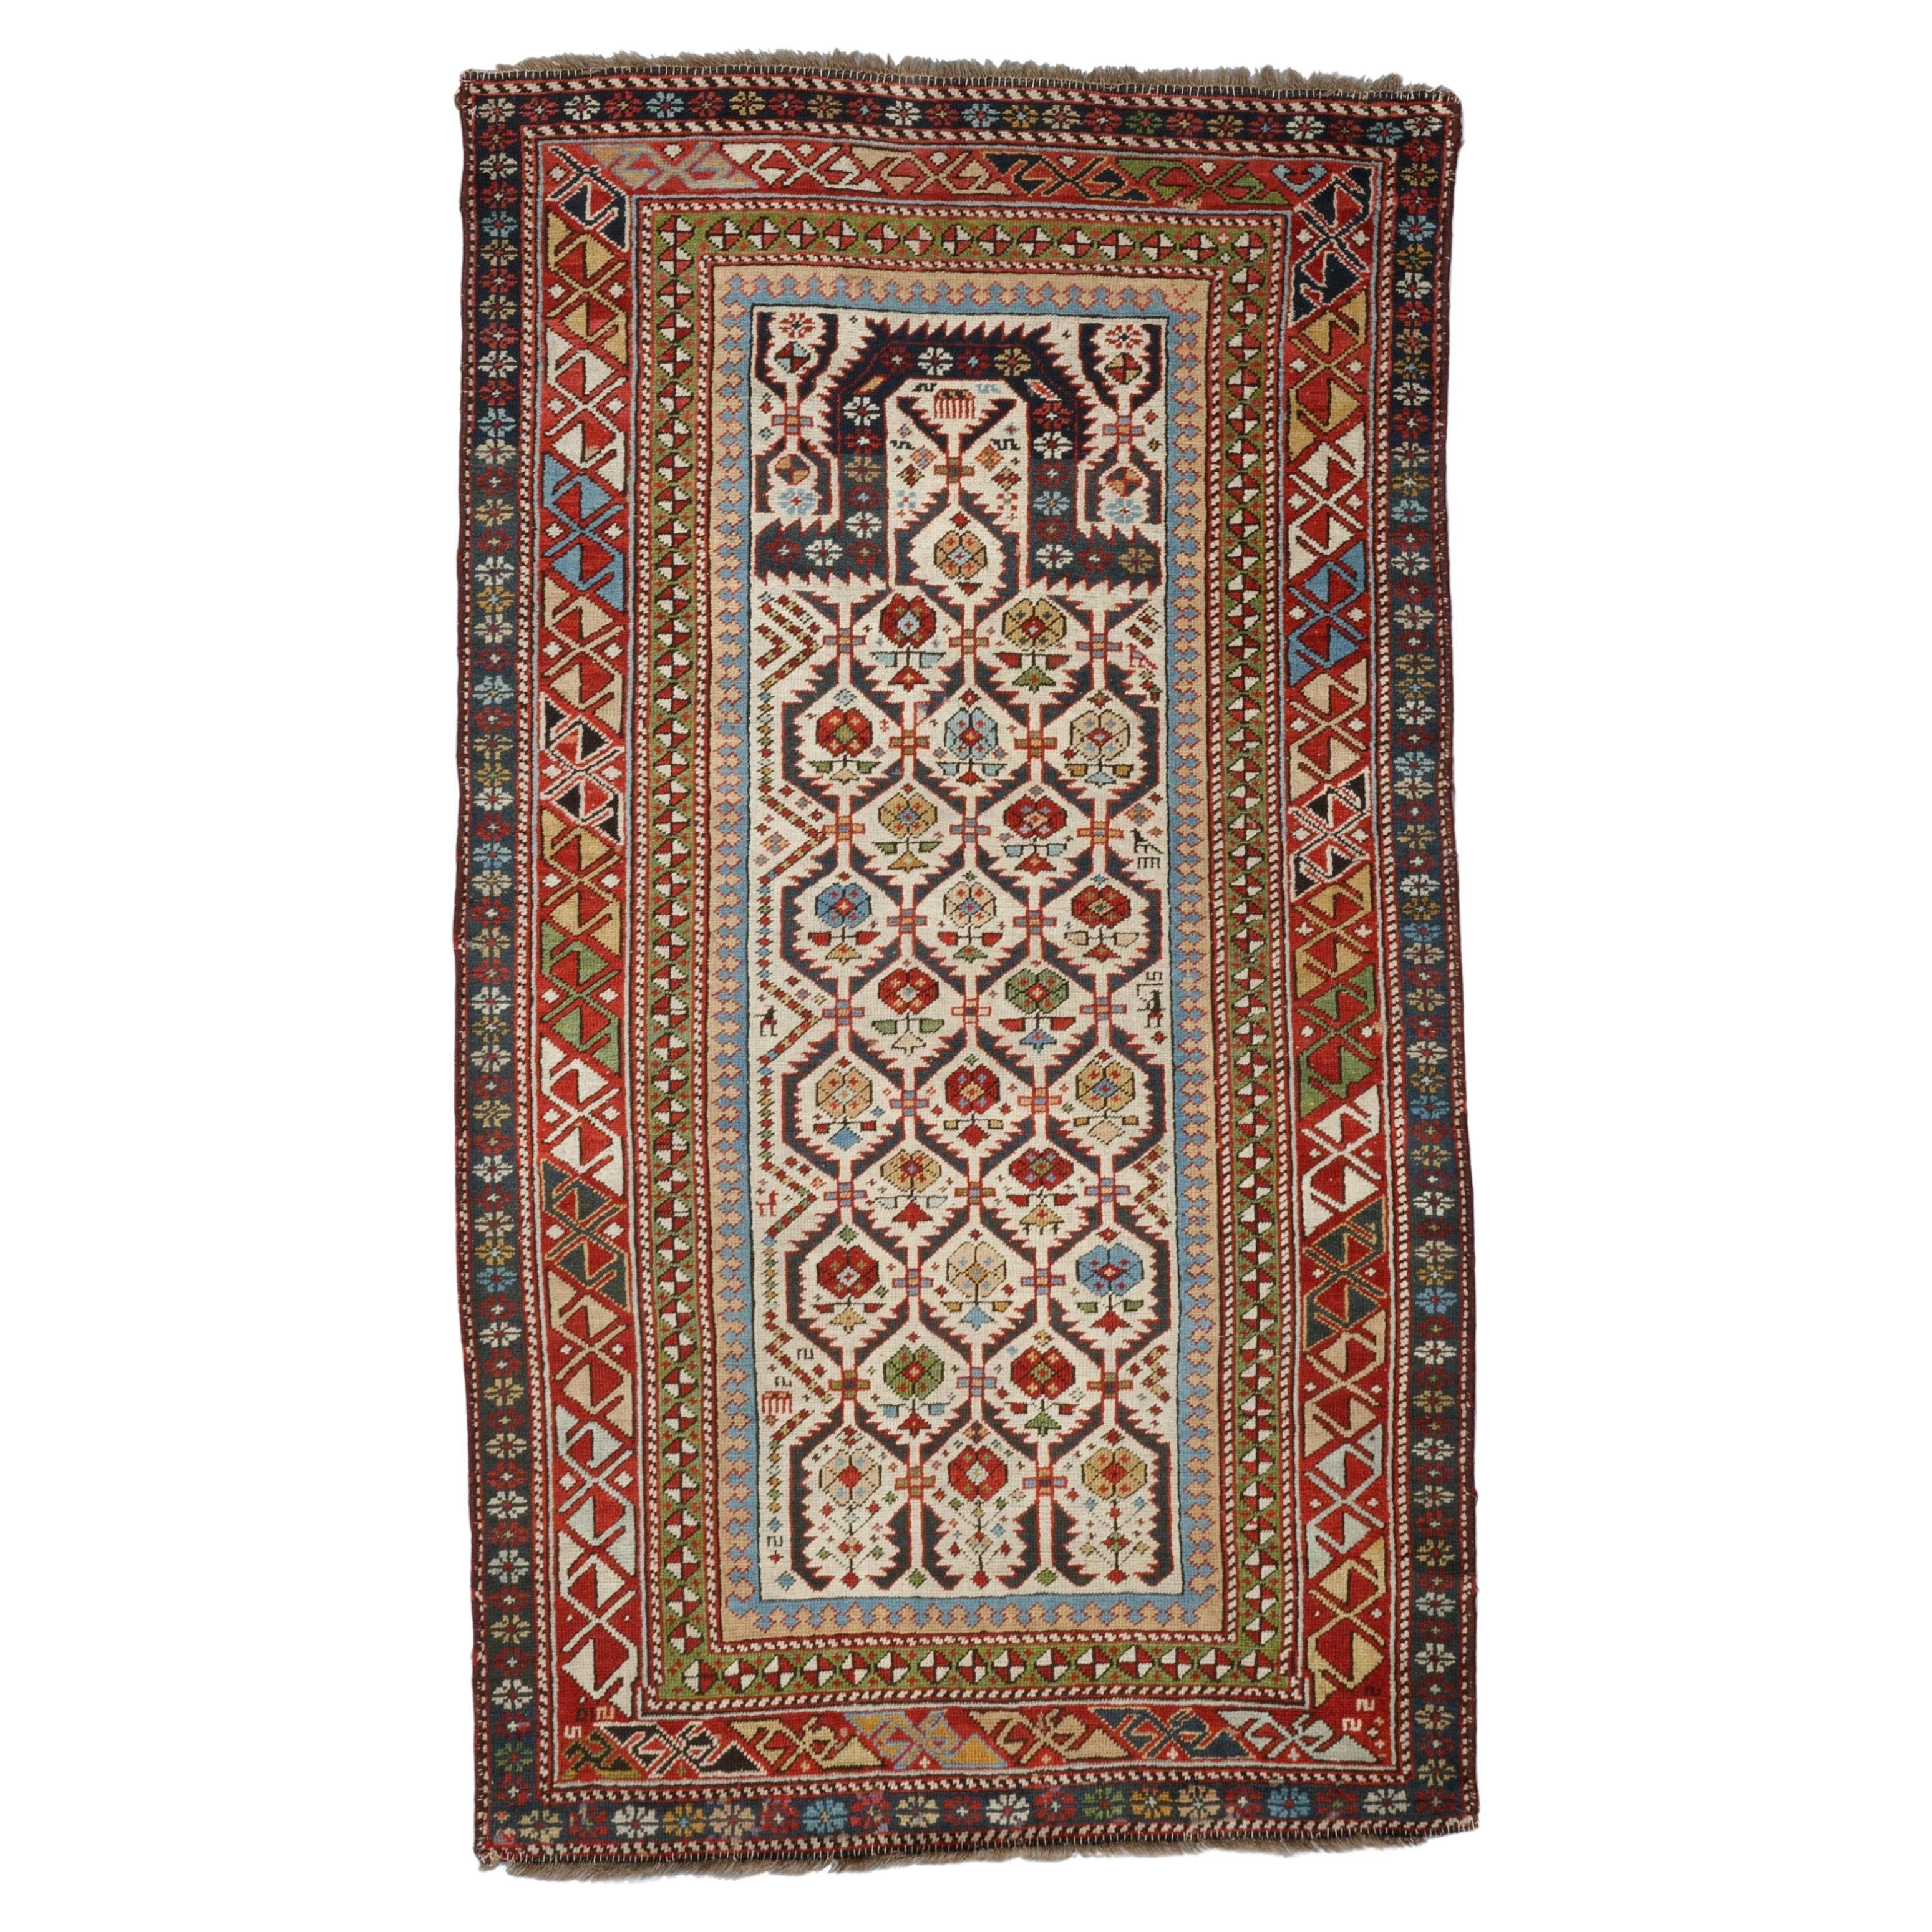 Antique Shirvan Prayer Rug - Late Of The 19th Century Prayer Shirvan Rug For Sale